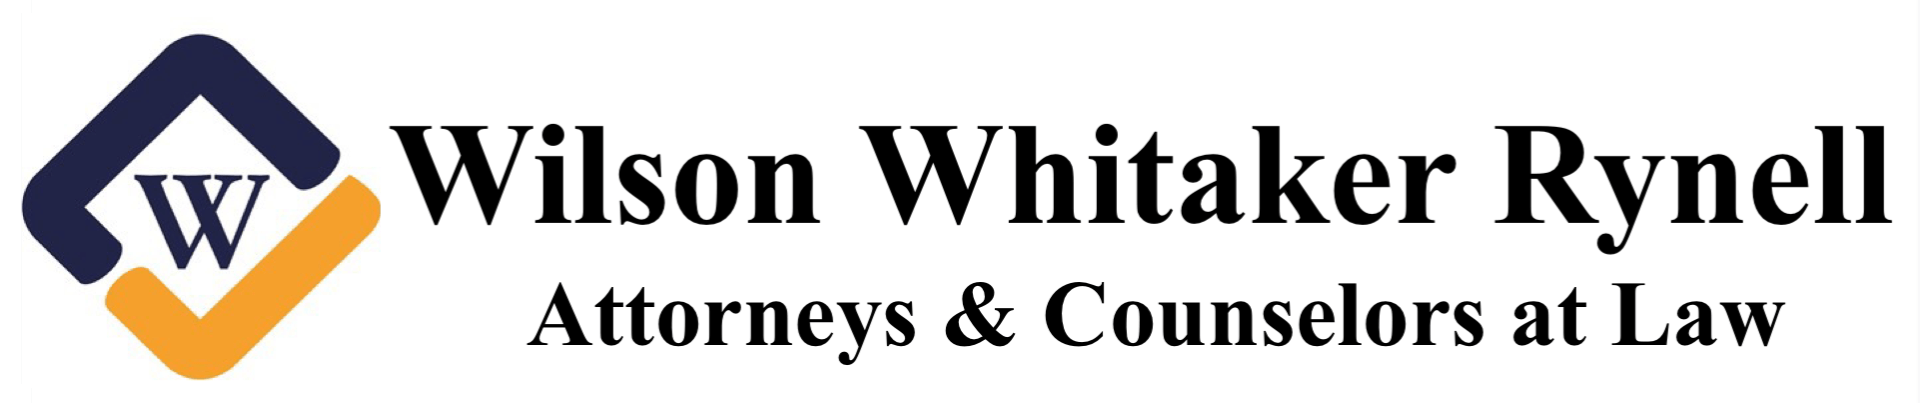 Wilson whitaker rynell attorneys and counselors at law logo